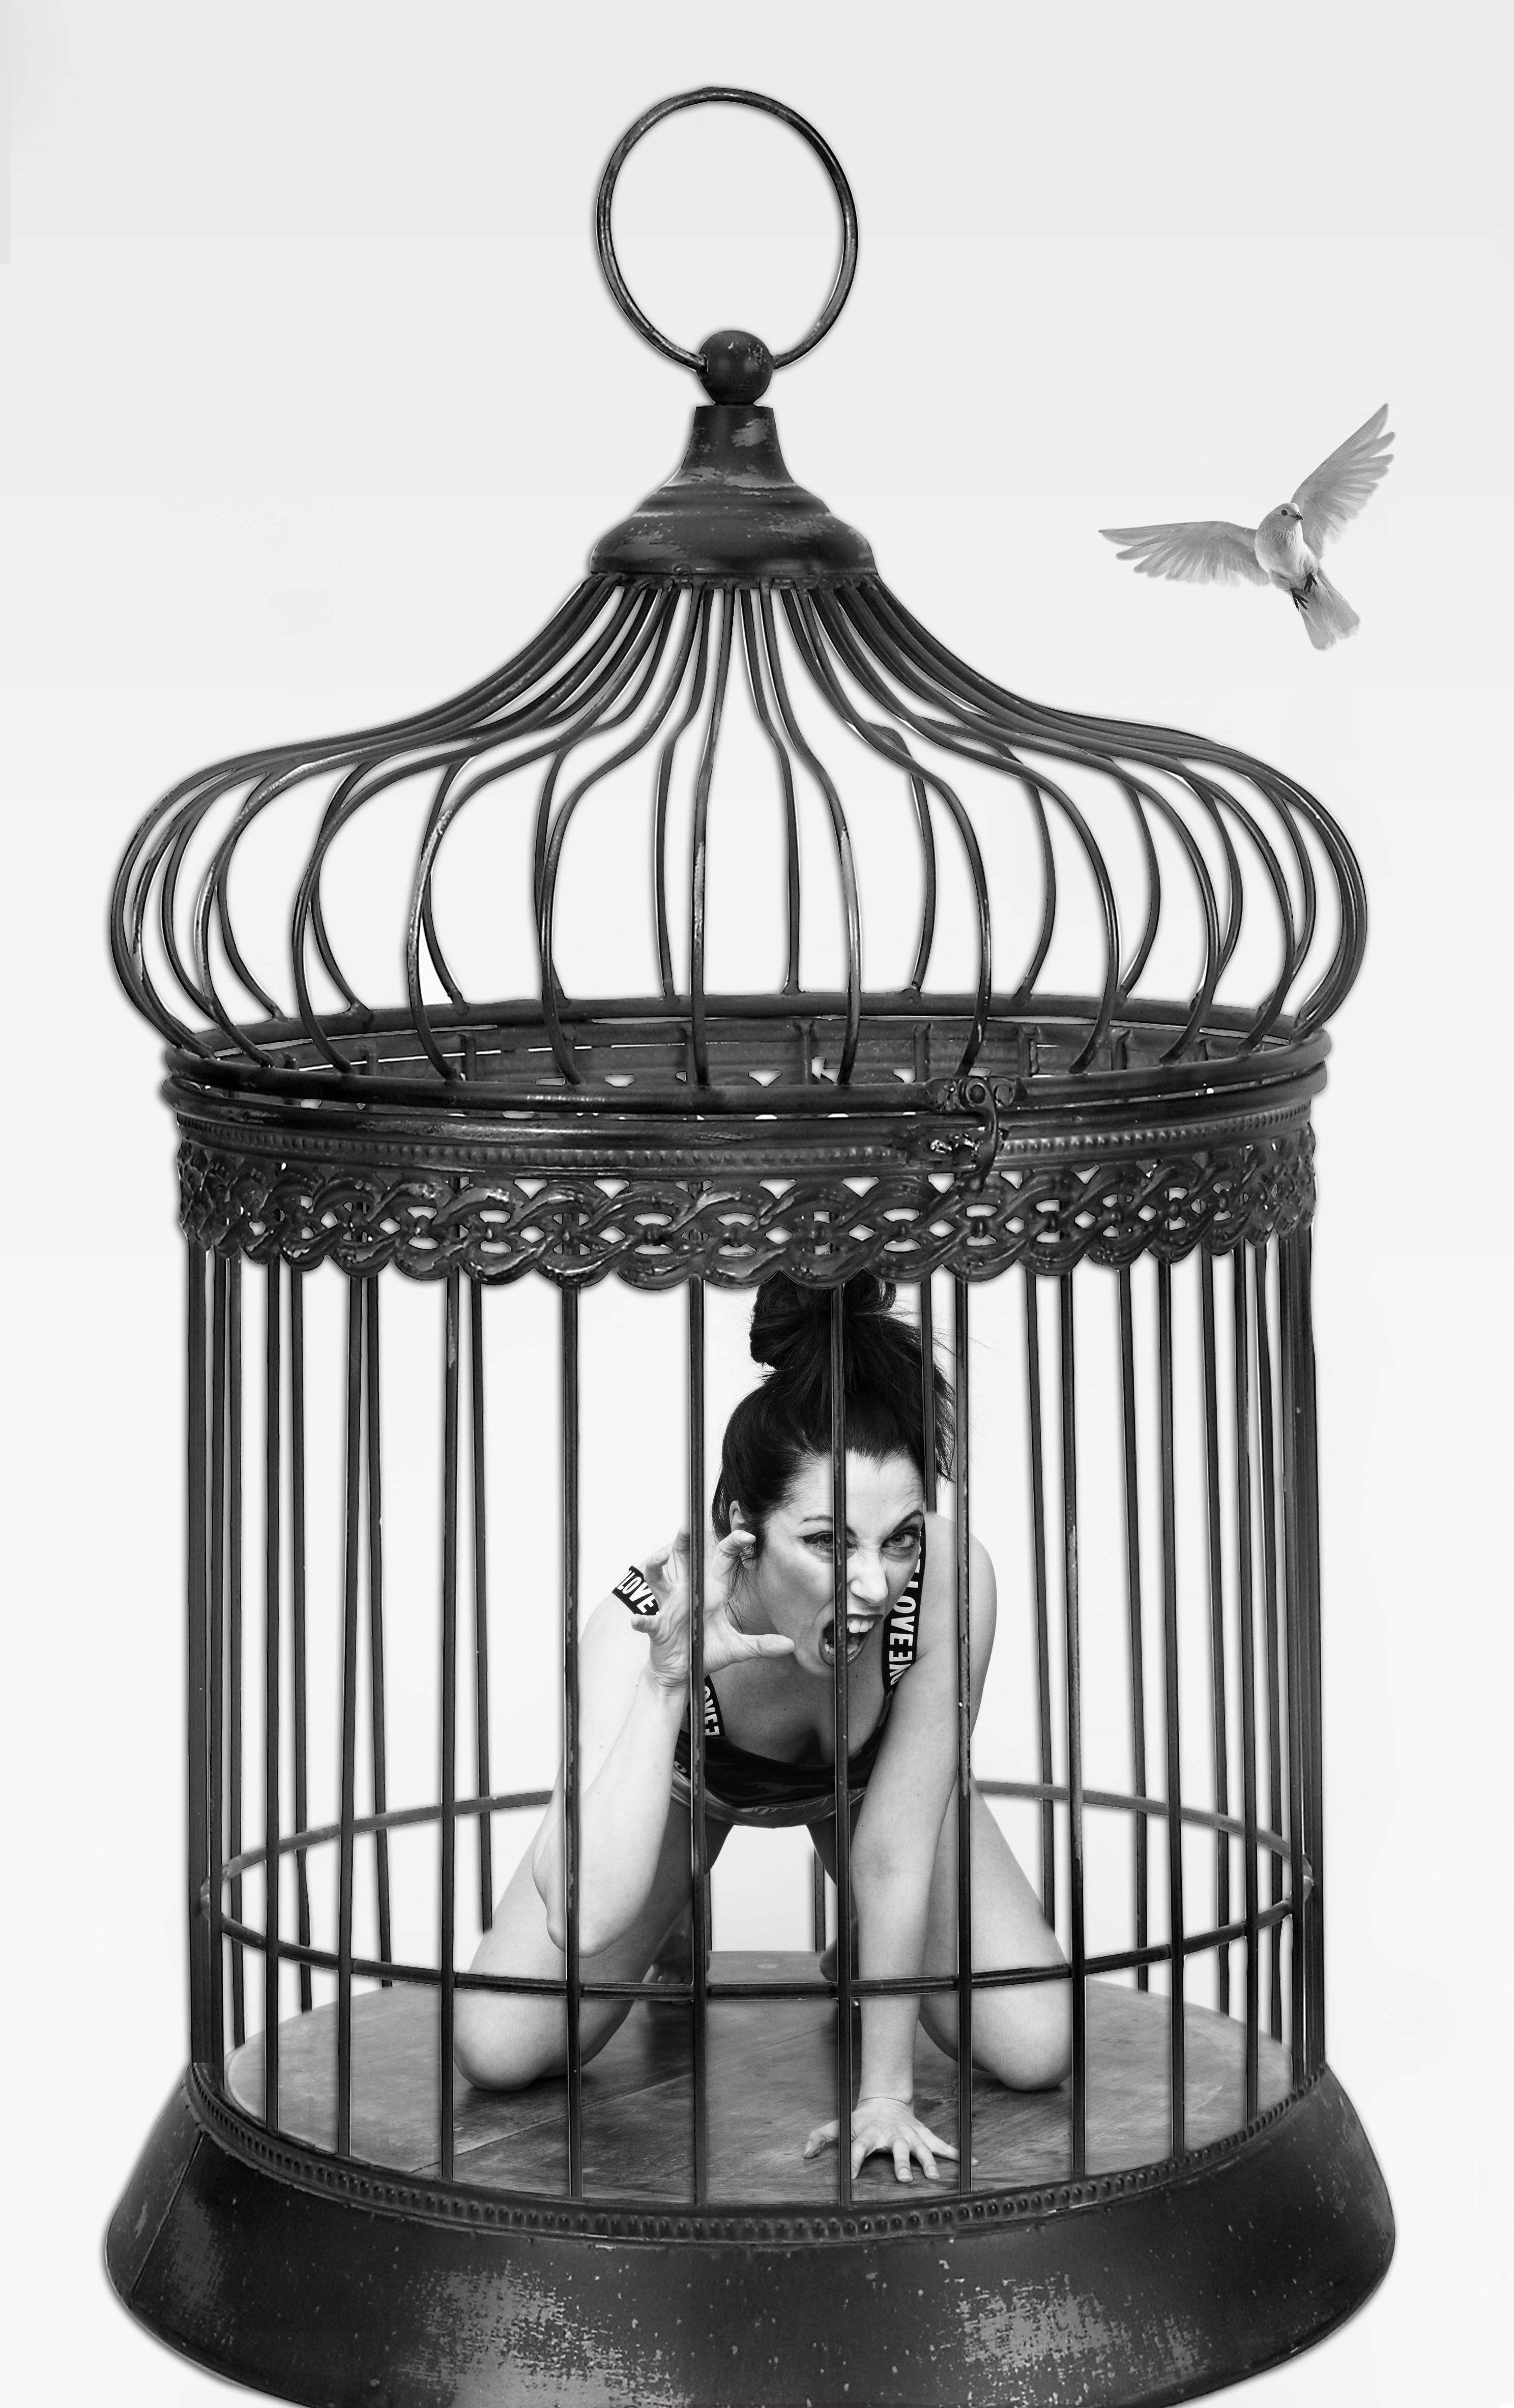 Silversnake Michelle cage freedom